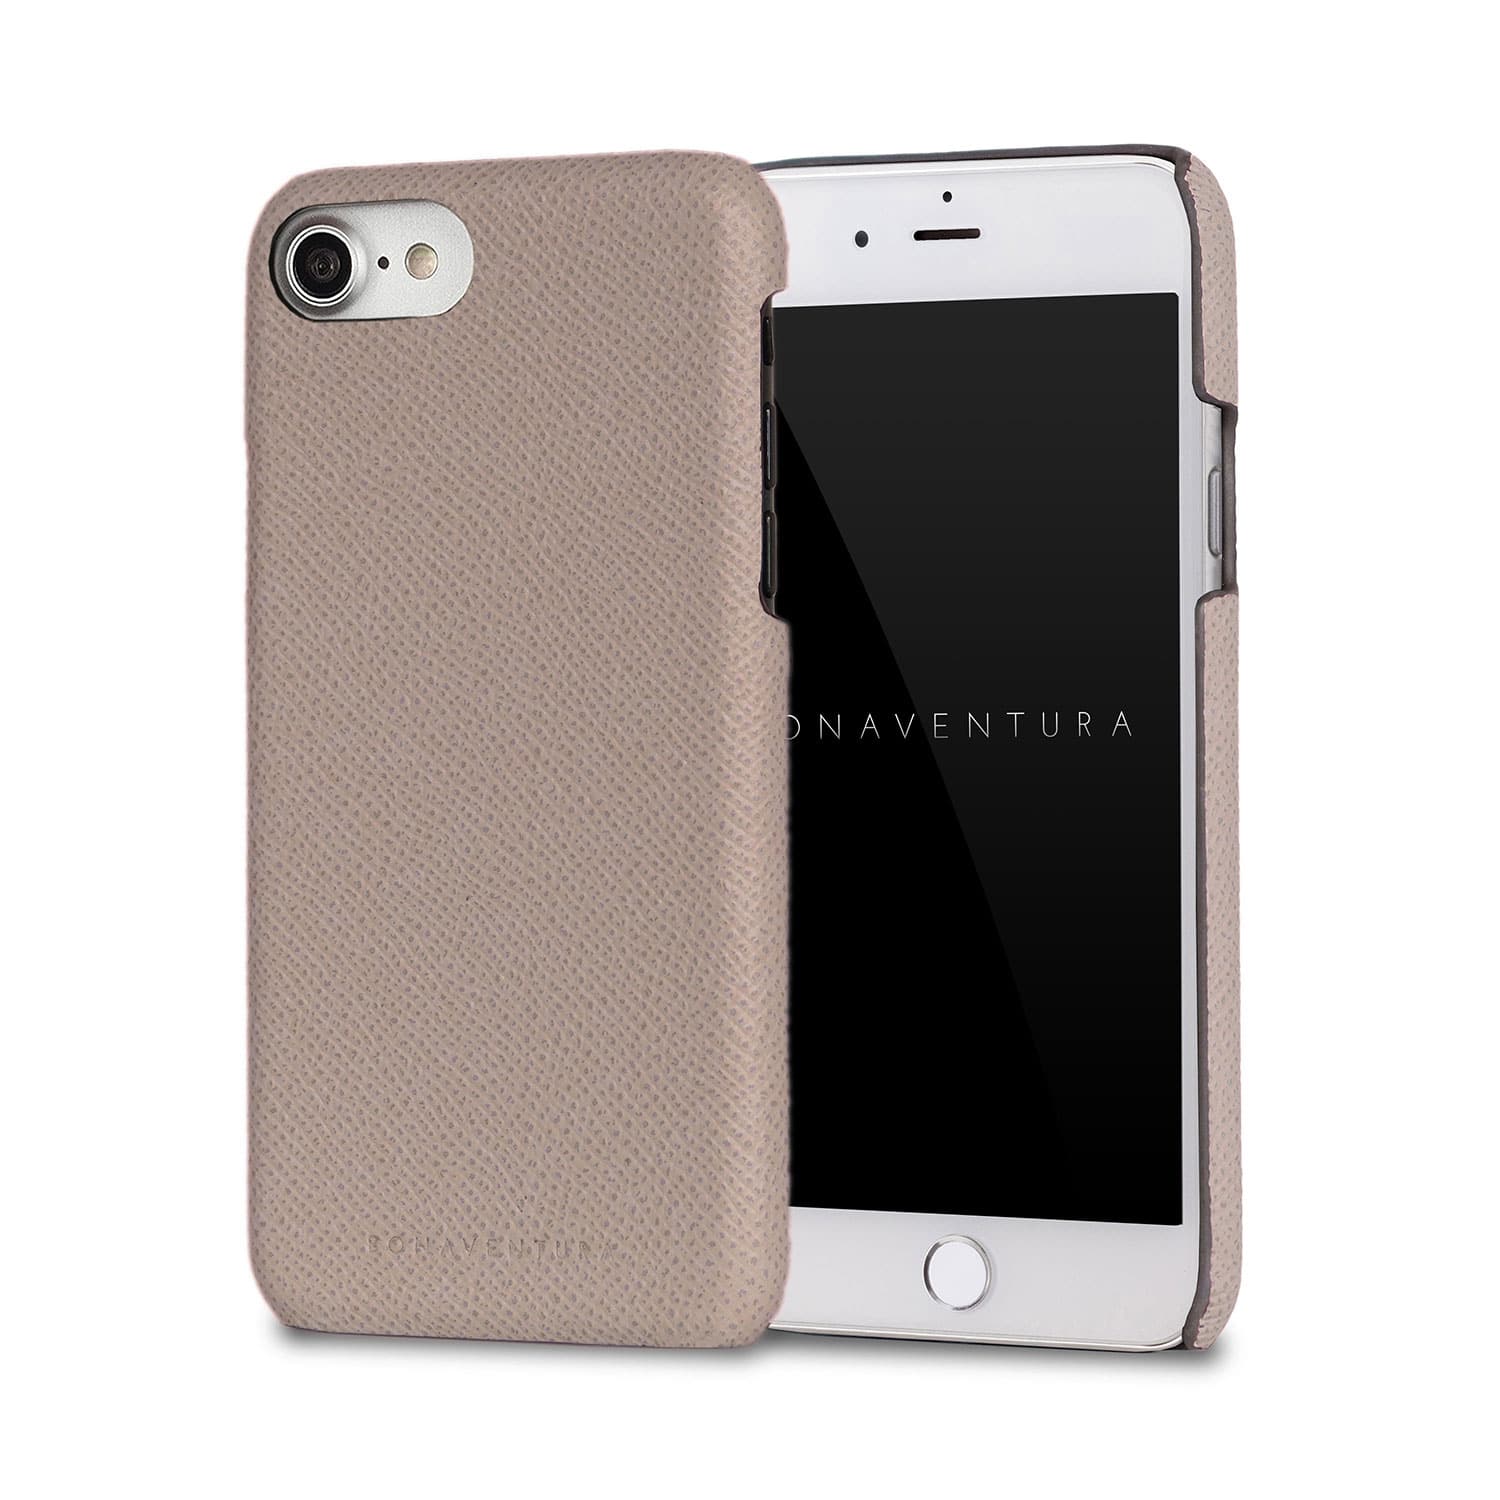 (iPhone SE / 8 / 7 / 6s / 6) Back Cover Case Noblesse Leather